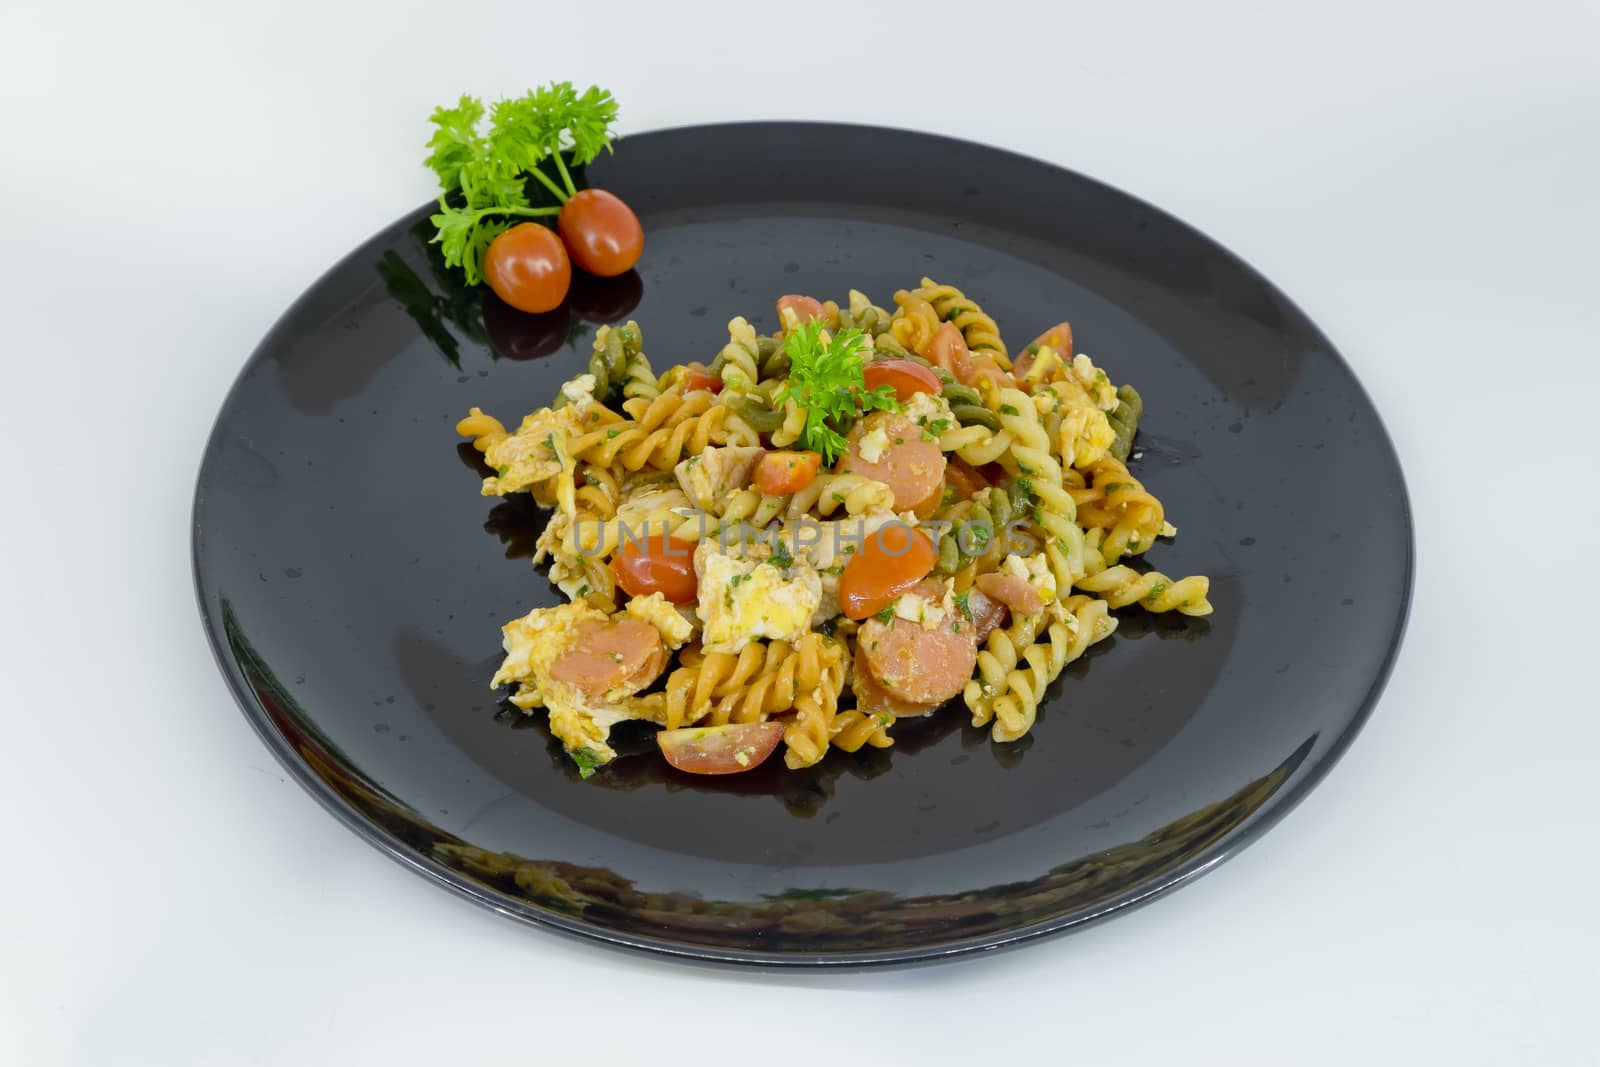 Macaroni pasta with tomato sauce and sausage on a black and whit by art9858